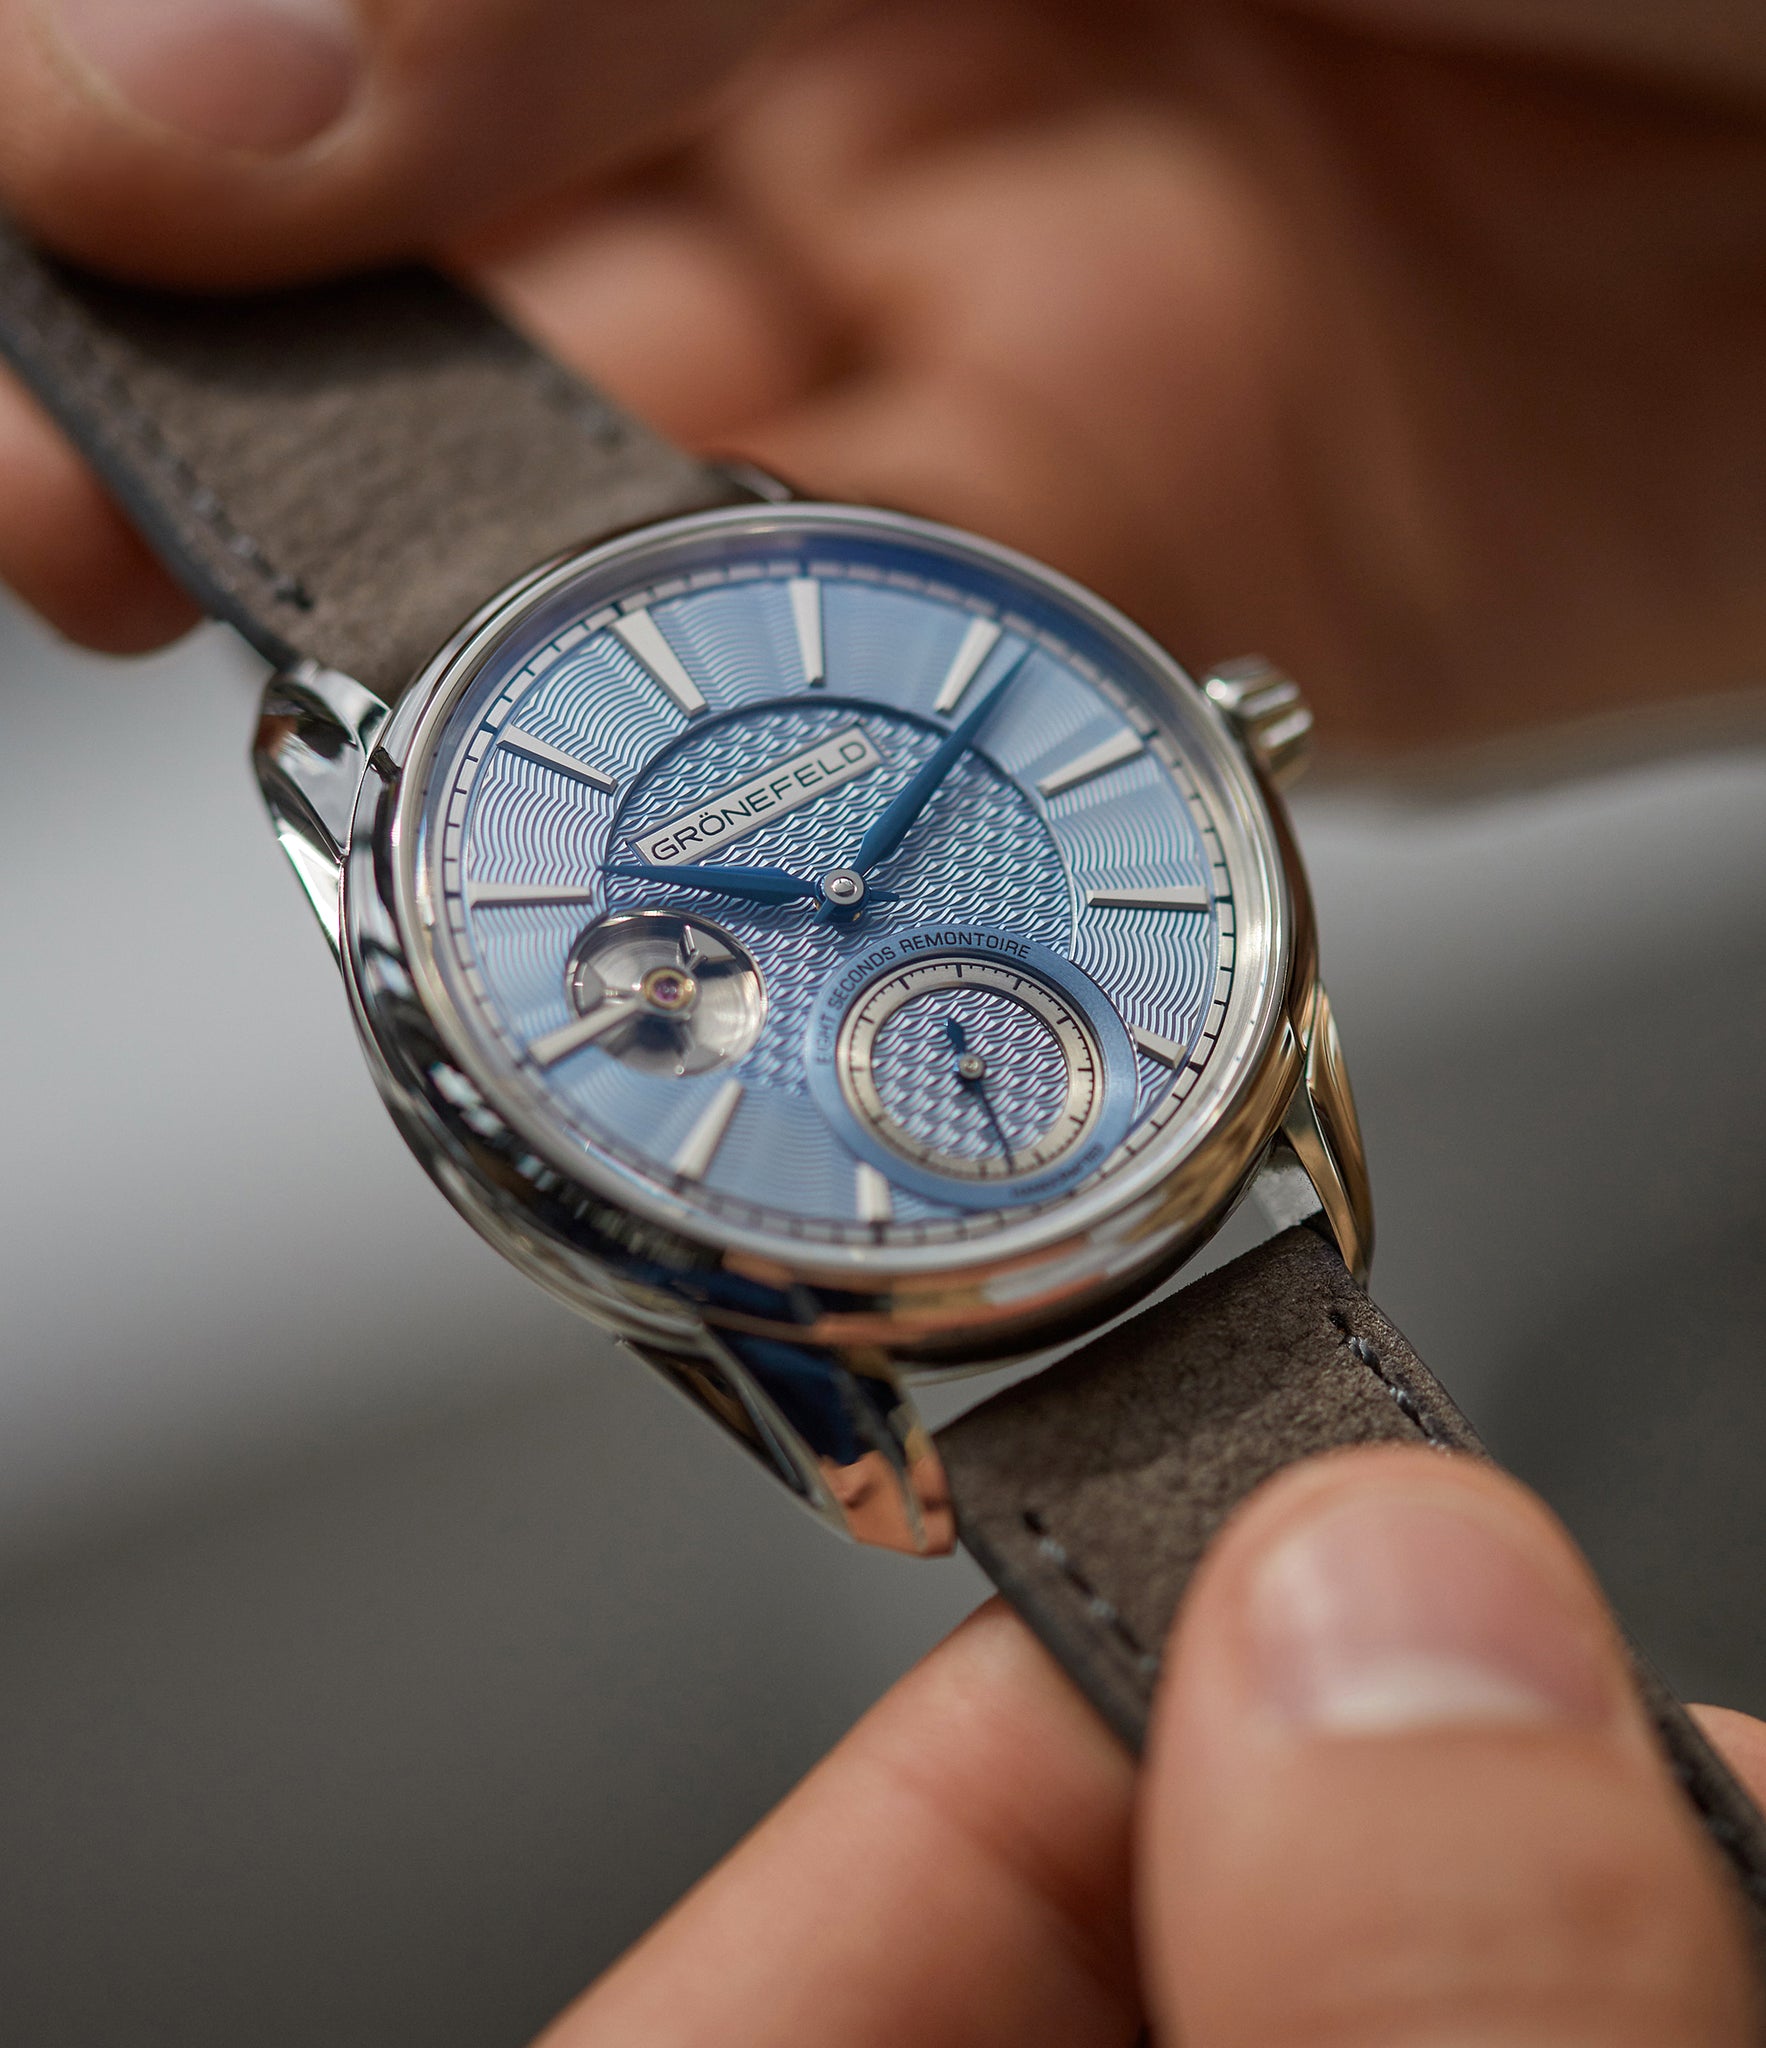 Grönefeld brothers 1941 Remontoire light blue Voutilainen dial eight seconds remontoire time-only dress watch for sale online at A Collected Man London UK specialist of independent watchmakers